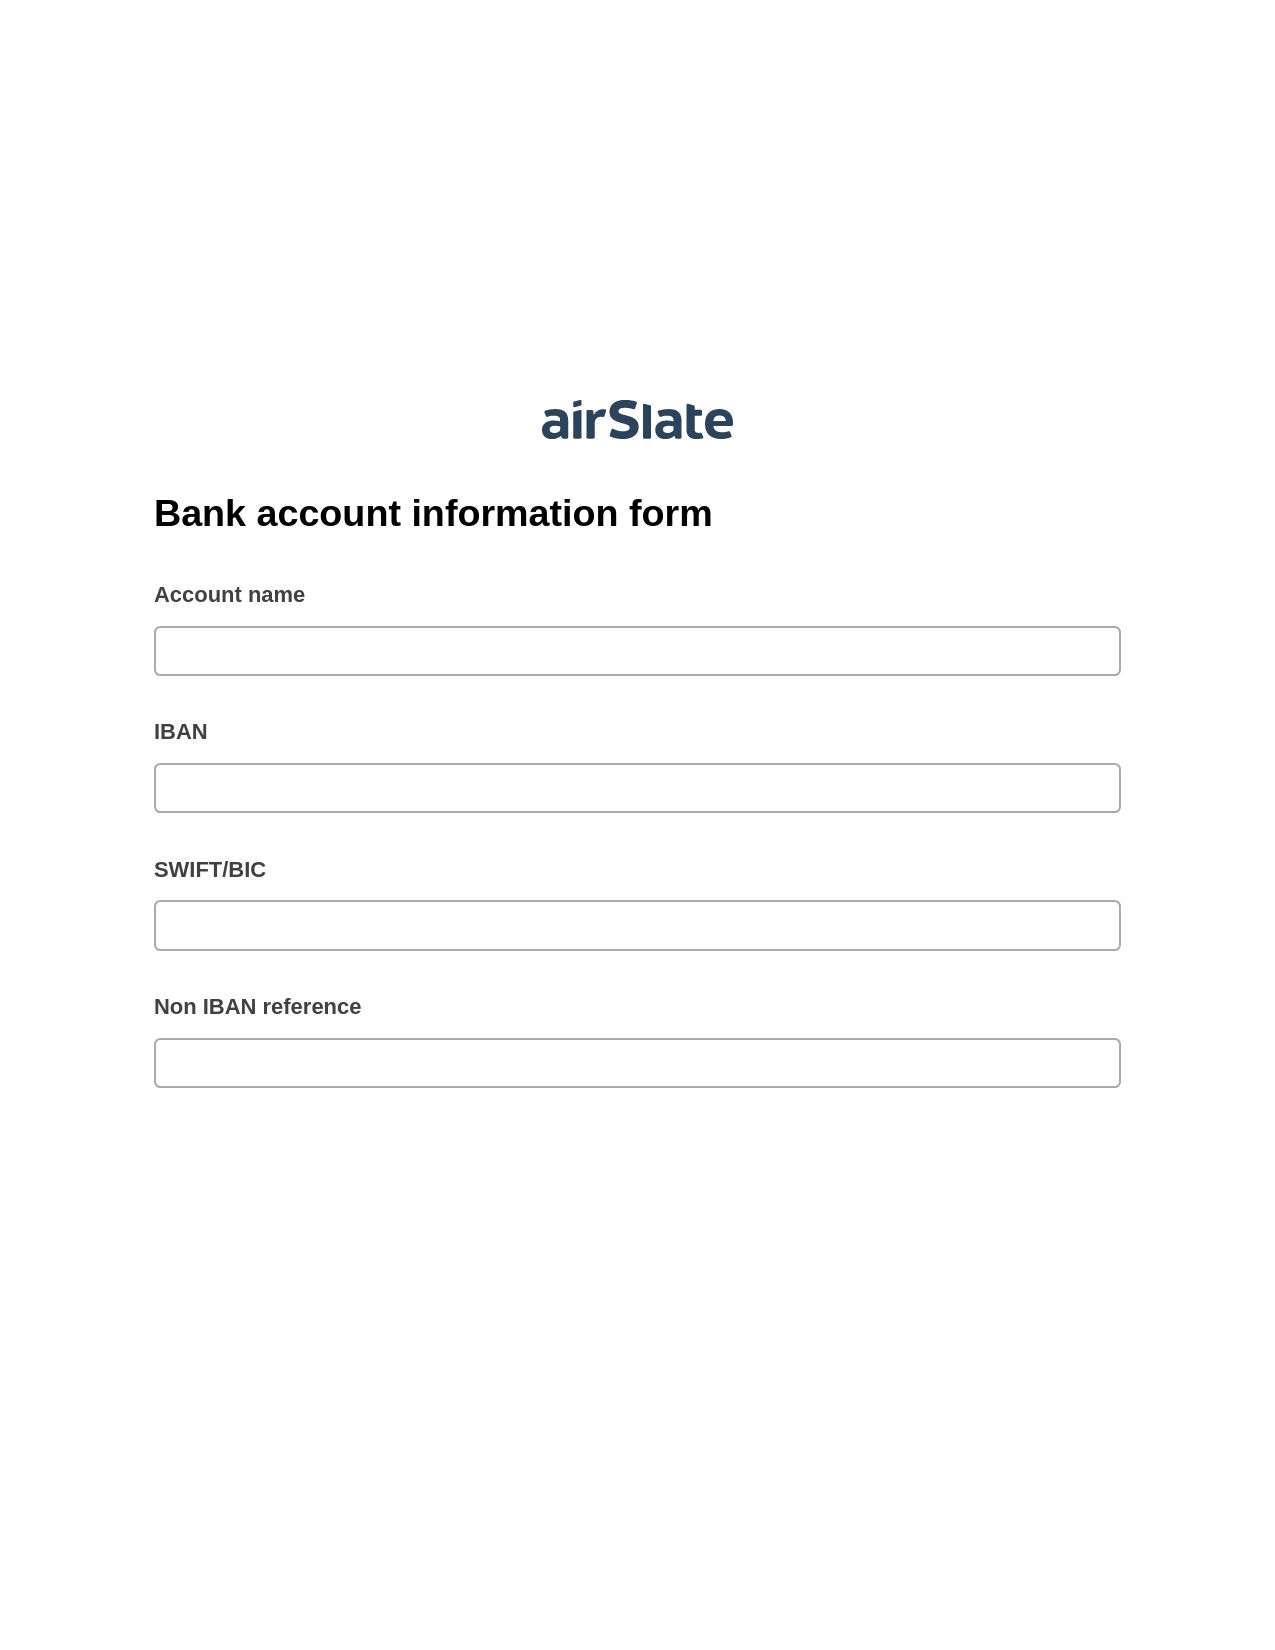 Bank account information form Pre-fill from Excel Spreadsheet Dropdown Options Bot, Slack Notification Bot, Export to NetSuite Record Bot